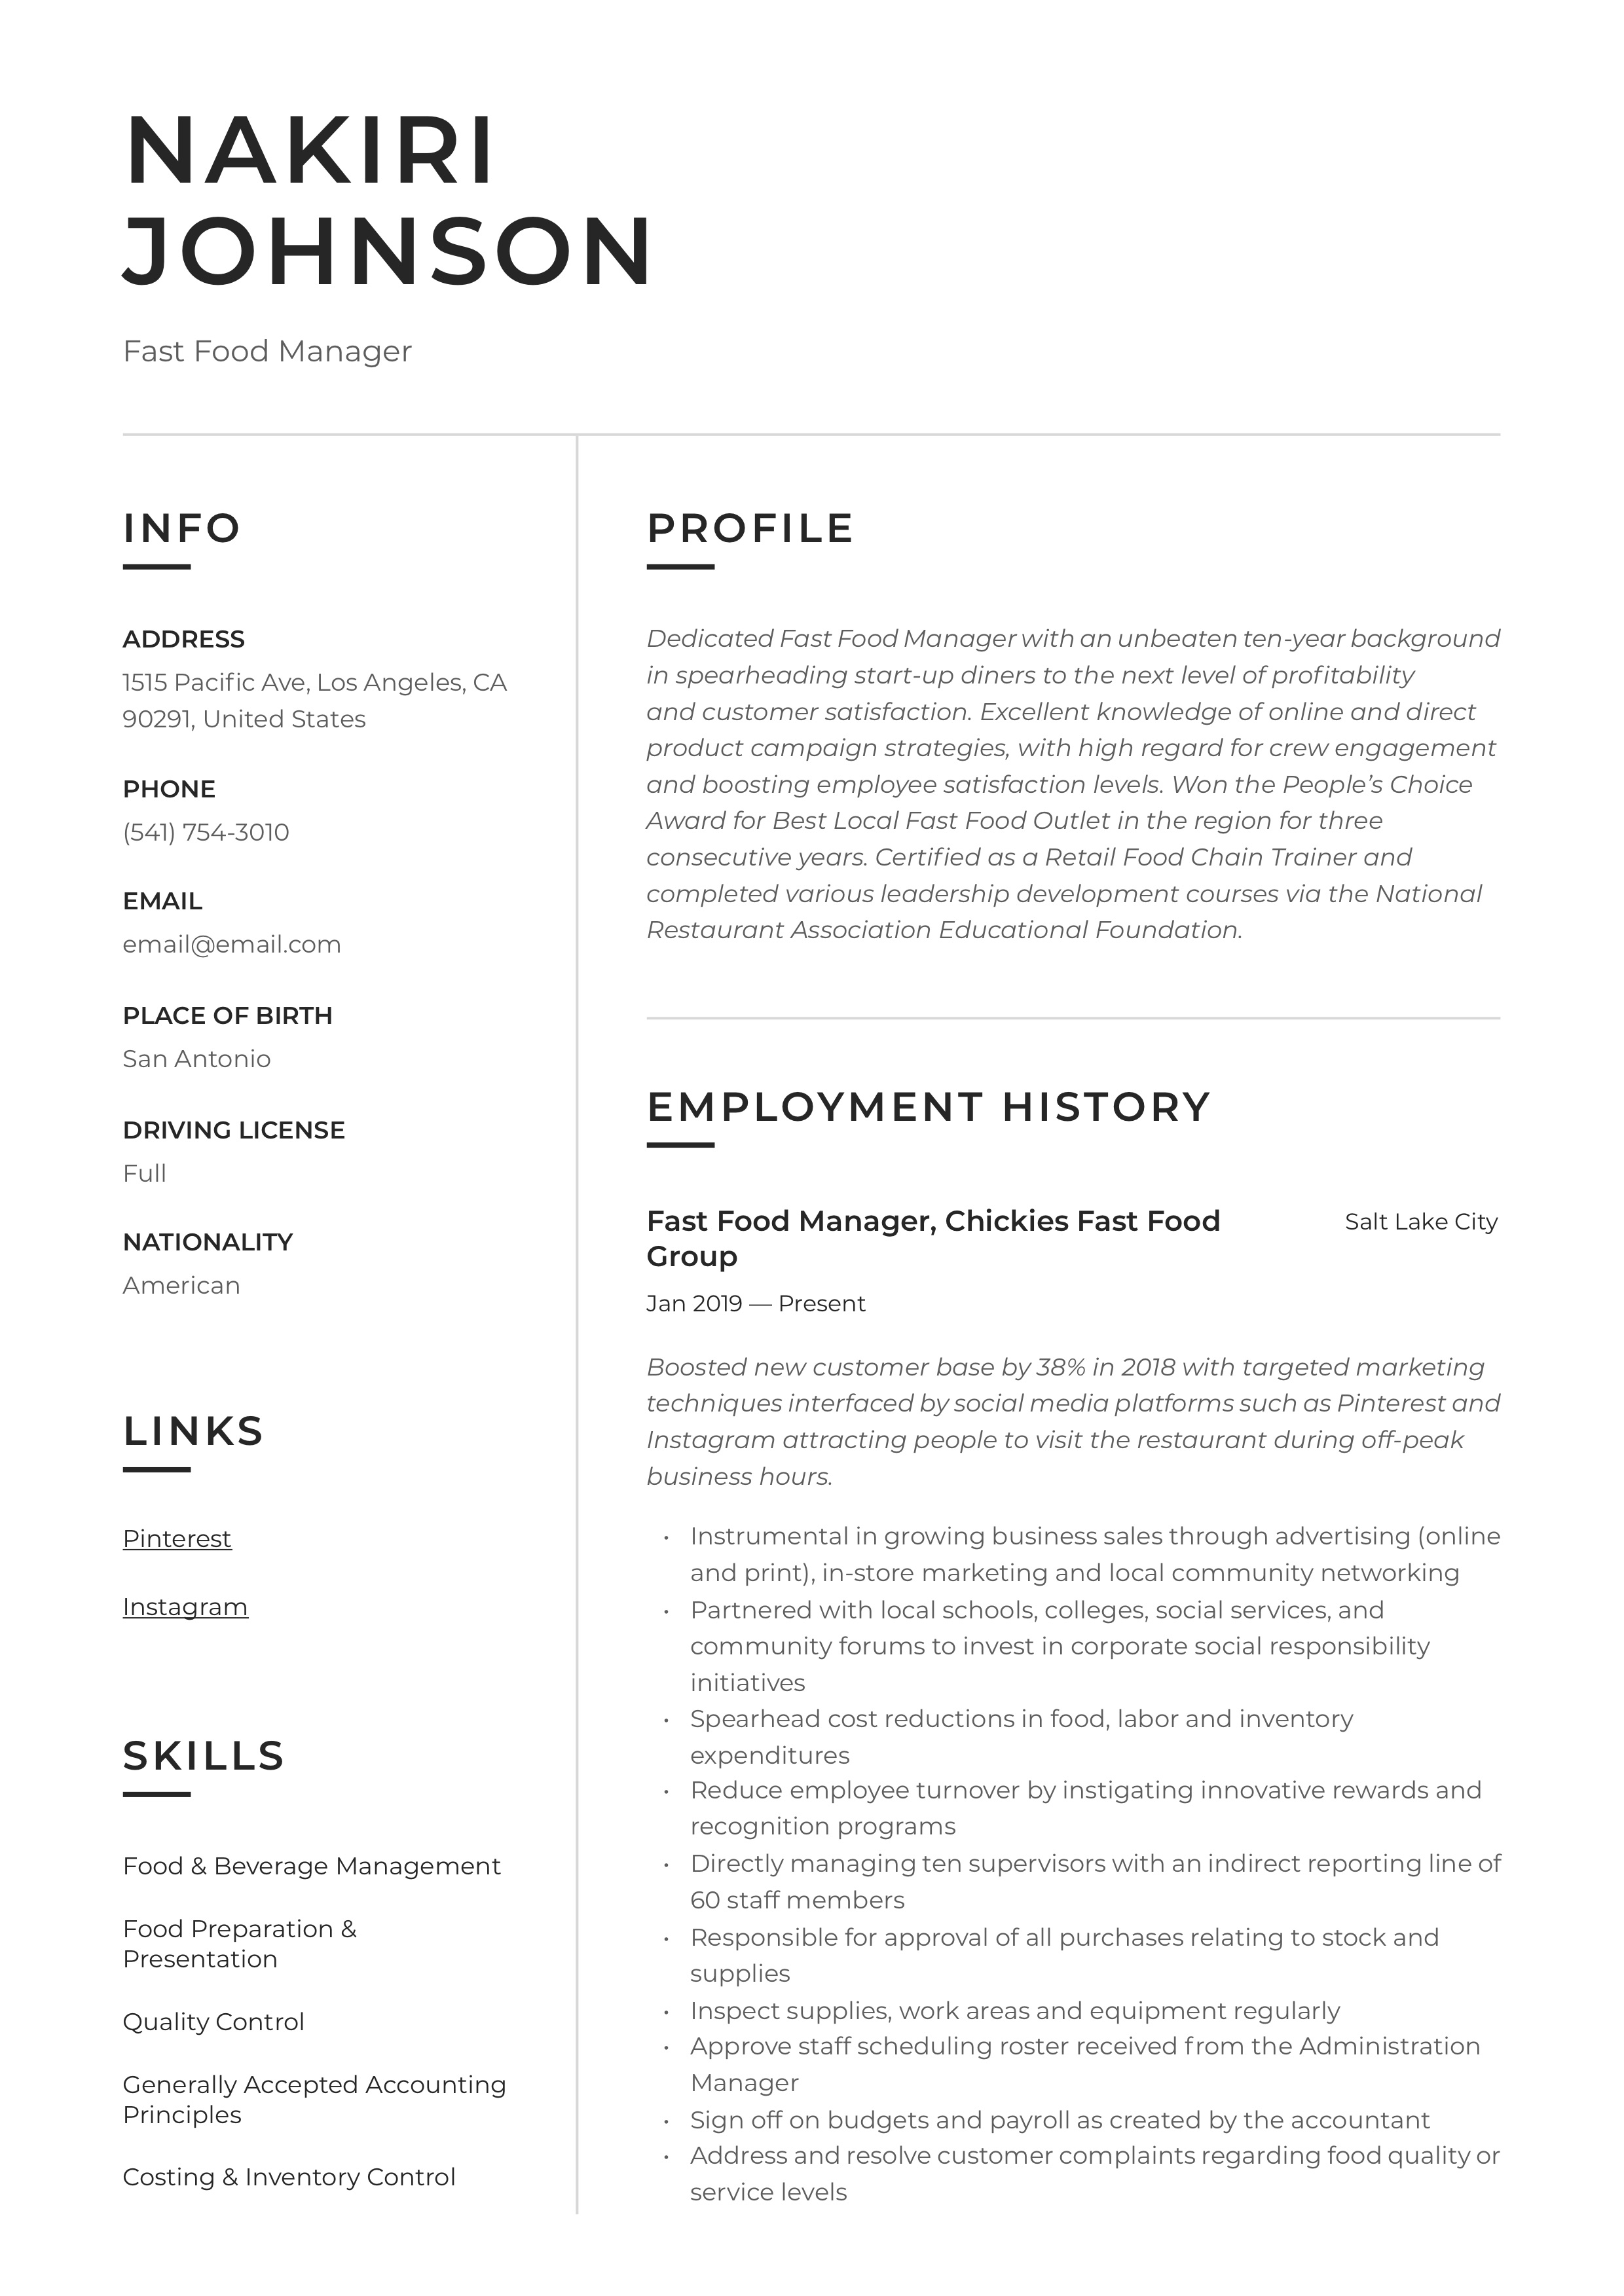 Resume Example Fast Food Manager